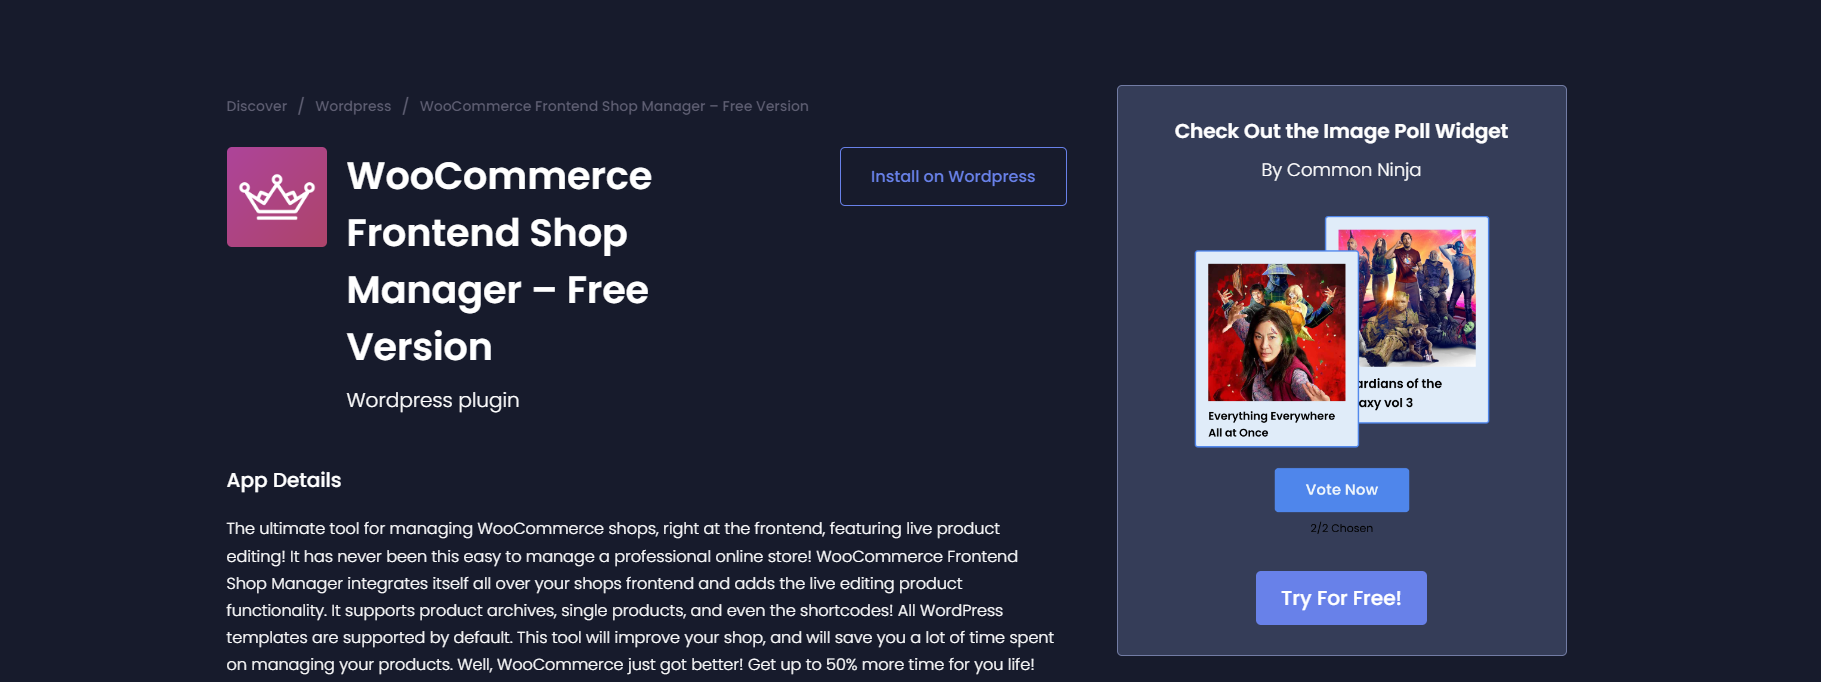 WooCommerce Frontend Shop Manager by Common Ninja